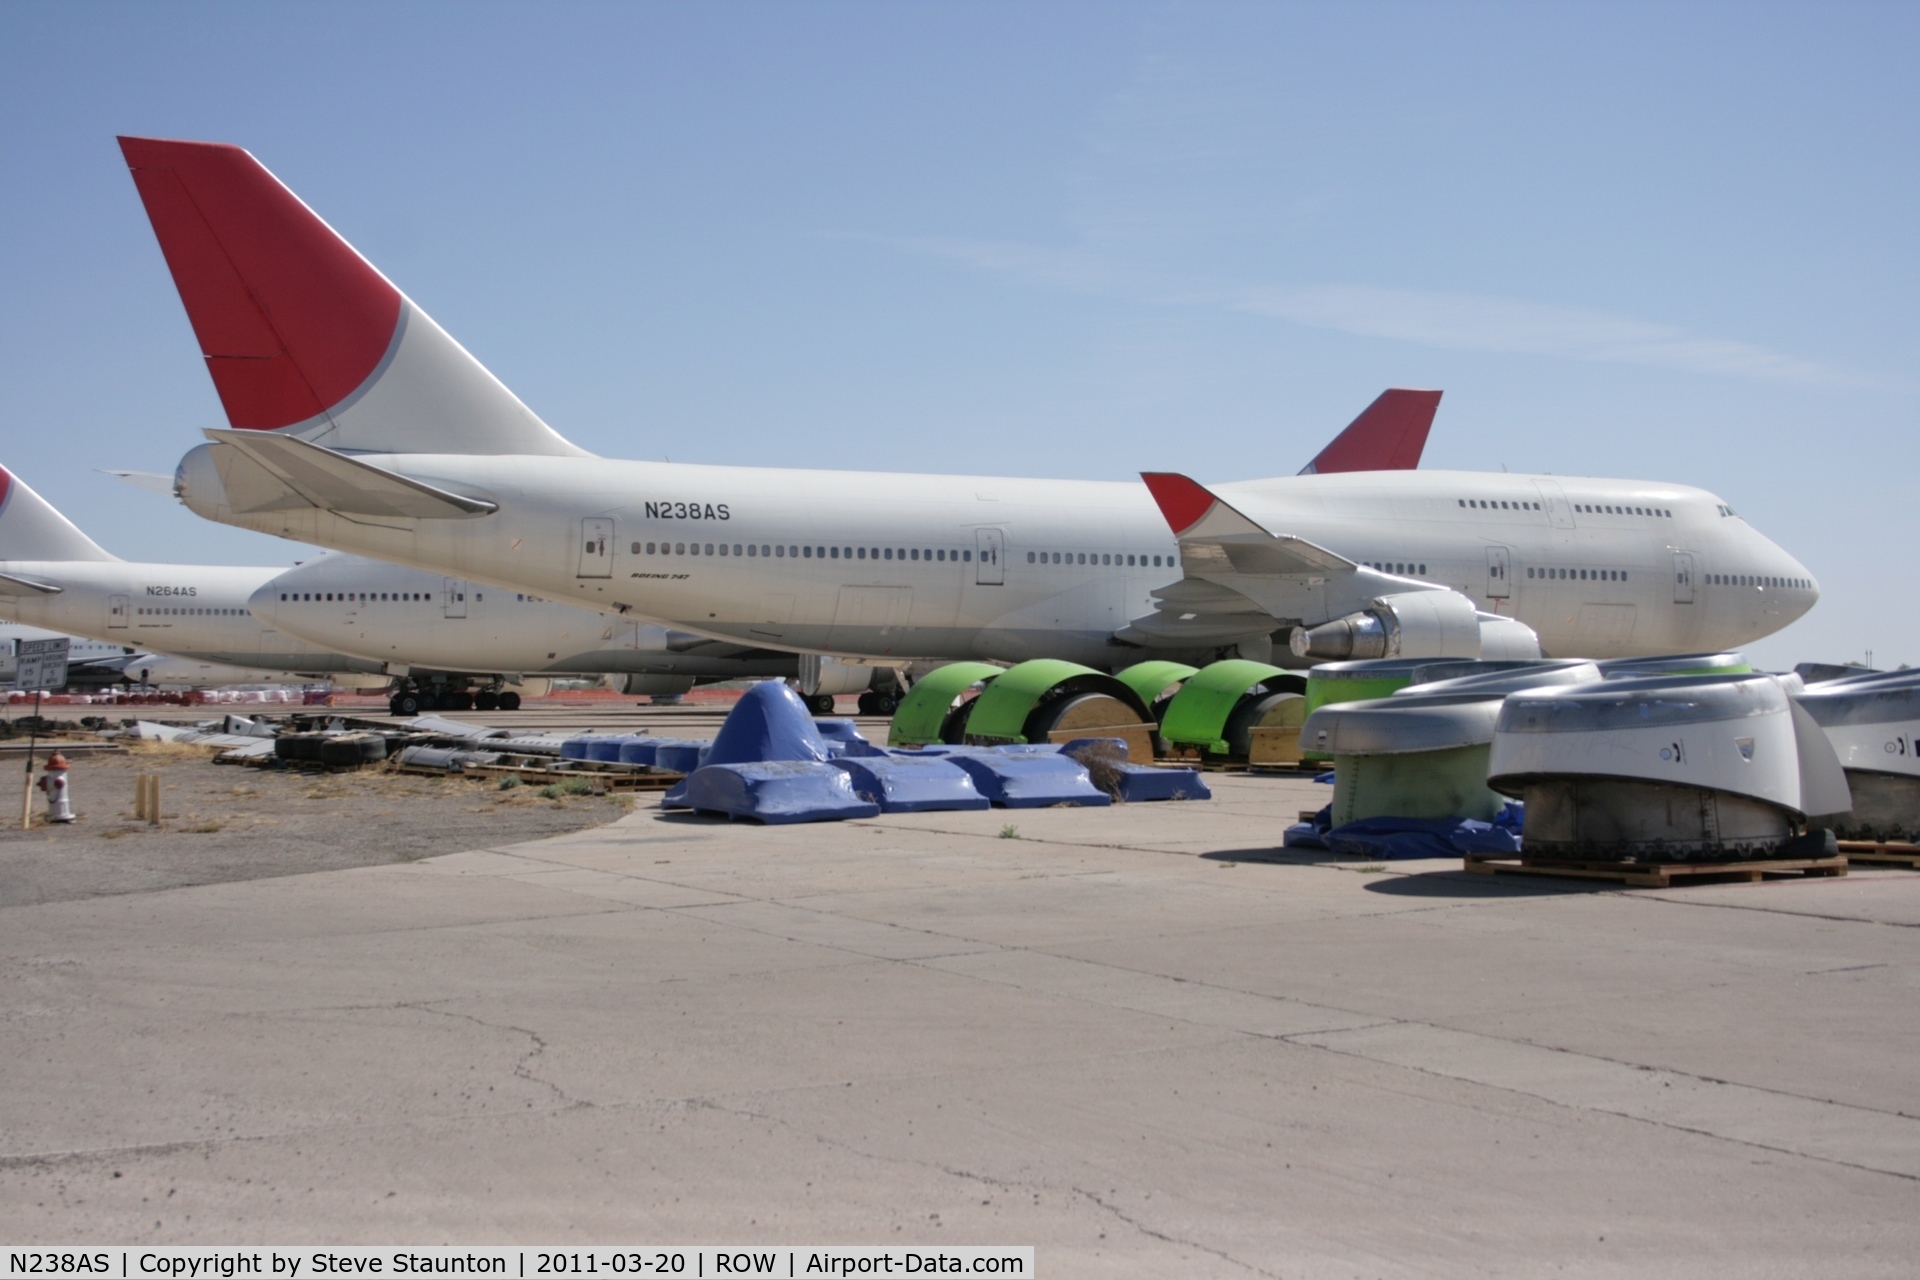 N238AS, 1991 Boeing 747-446 C/N 25308, Taken at Roswell International Air Centre Storage Facility, New Mexico in March 2011 whilst on an Aeroprint Aviation tour